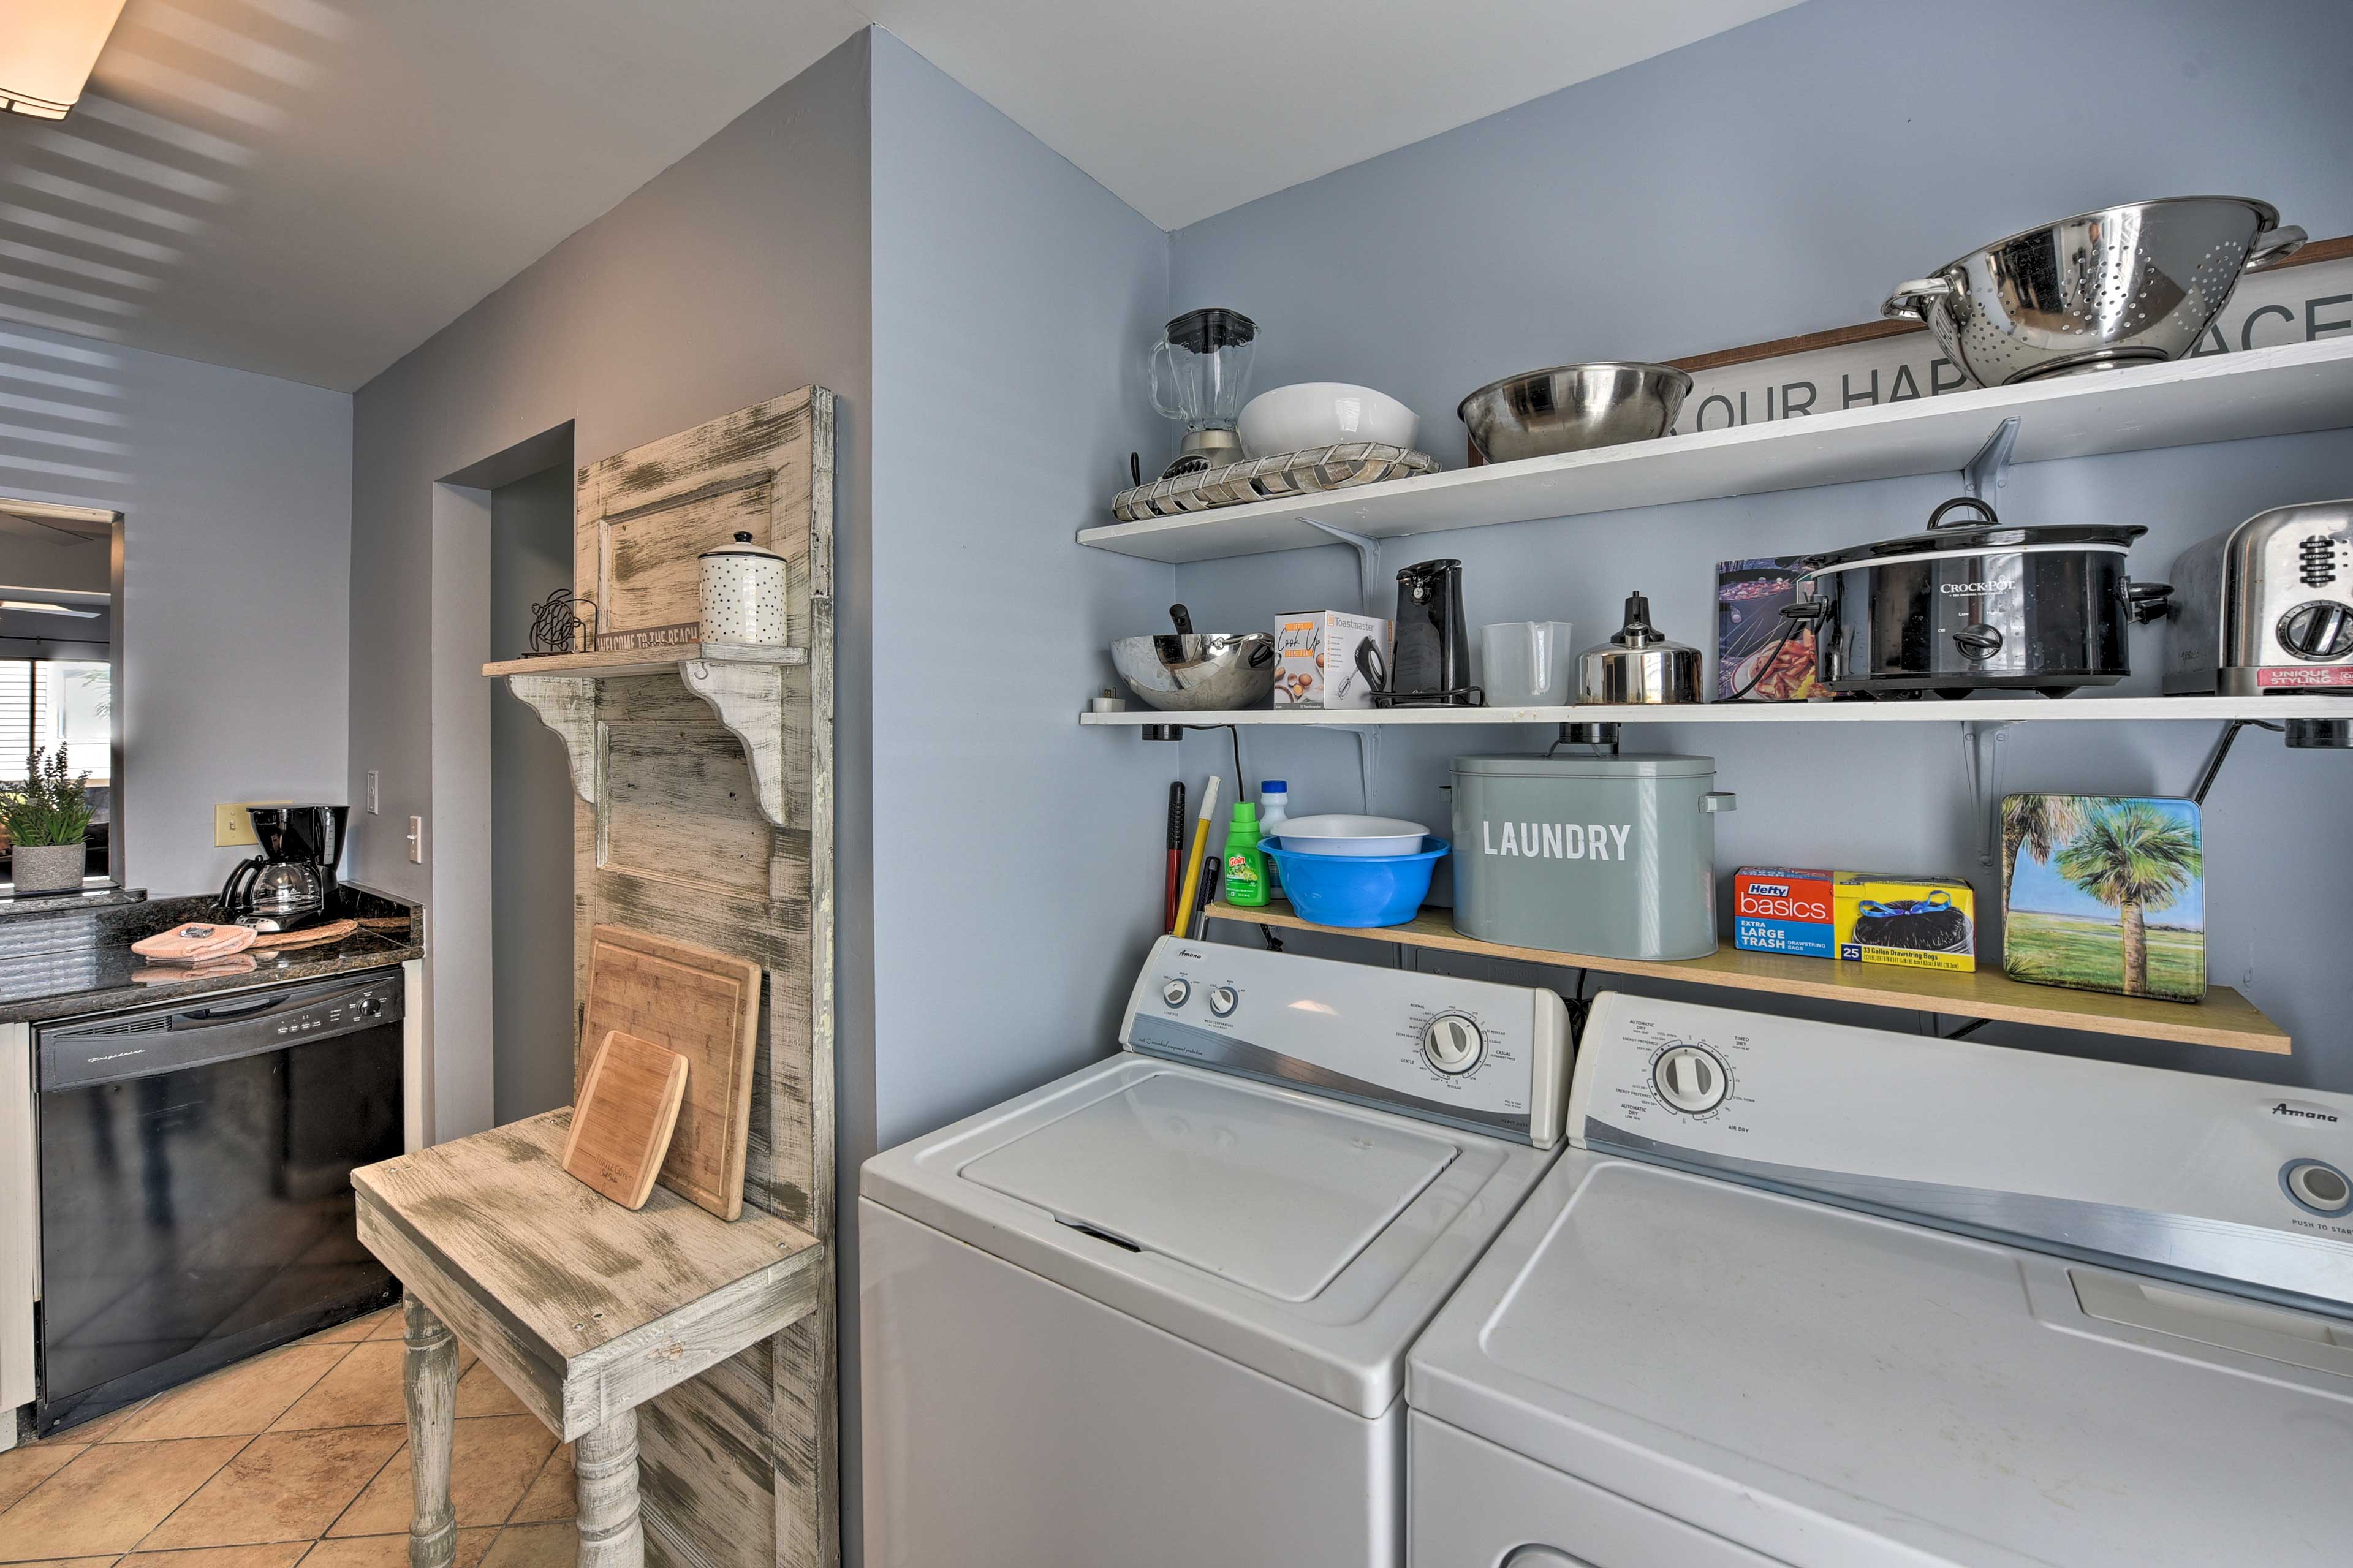 Laundry Room | Cleaning Essentials